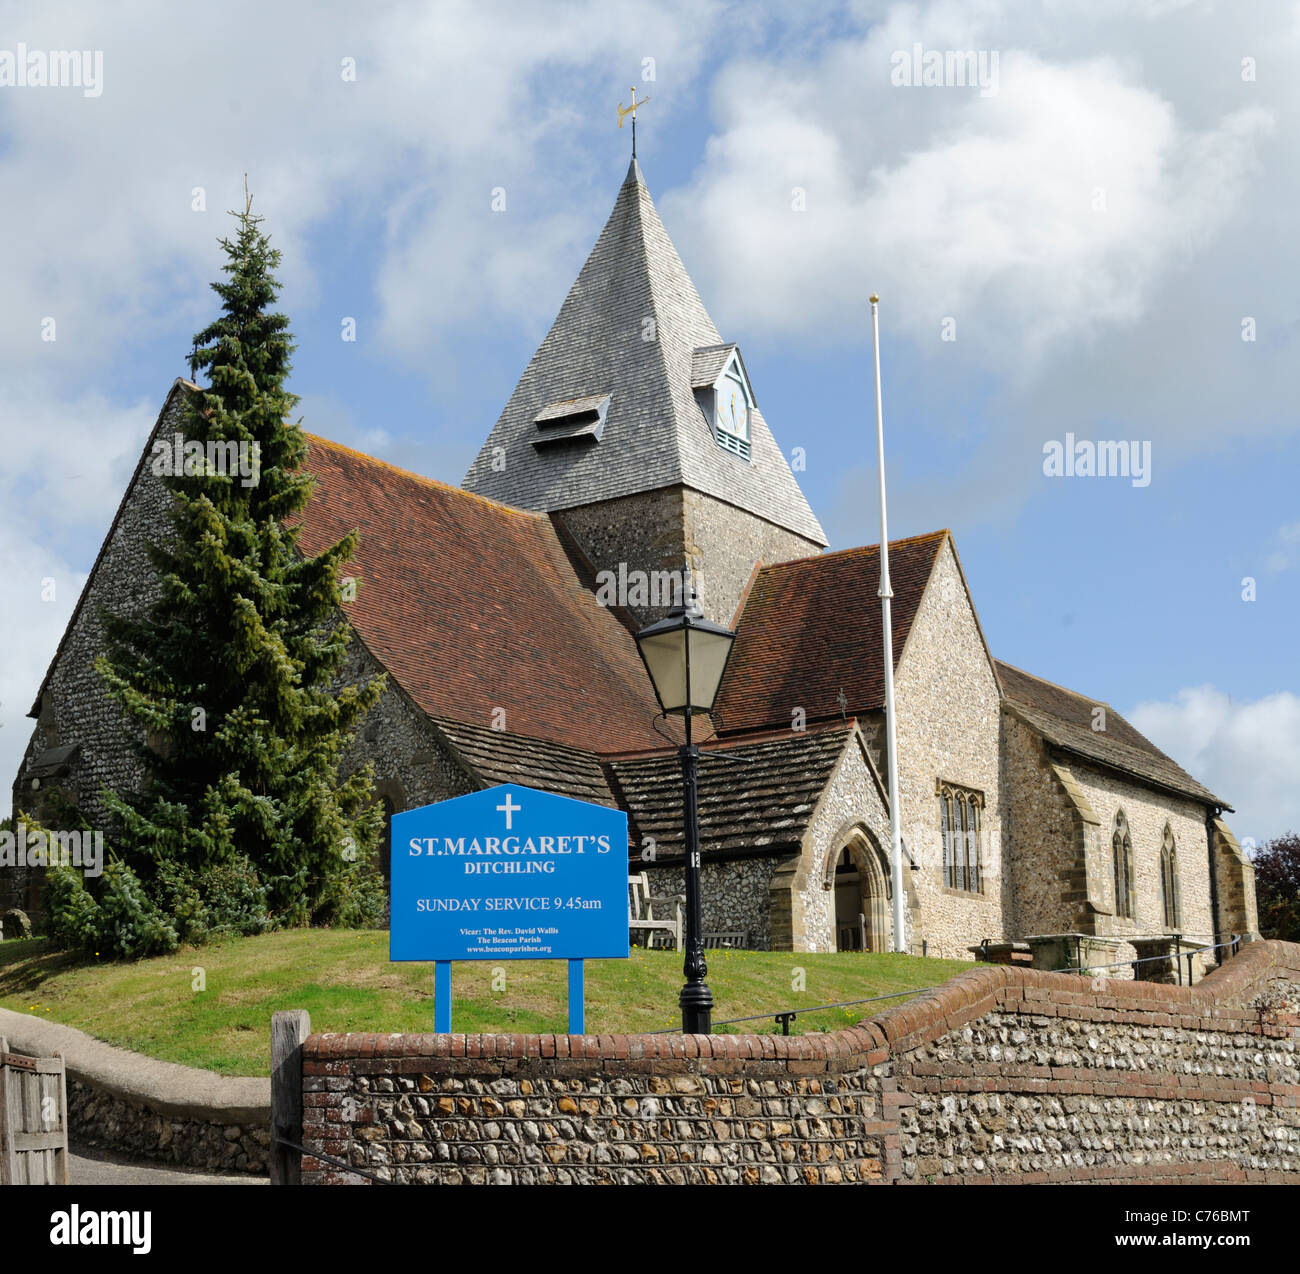 St Margaret's Church in Ditchling, Sussex, England. Stock Photo